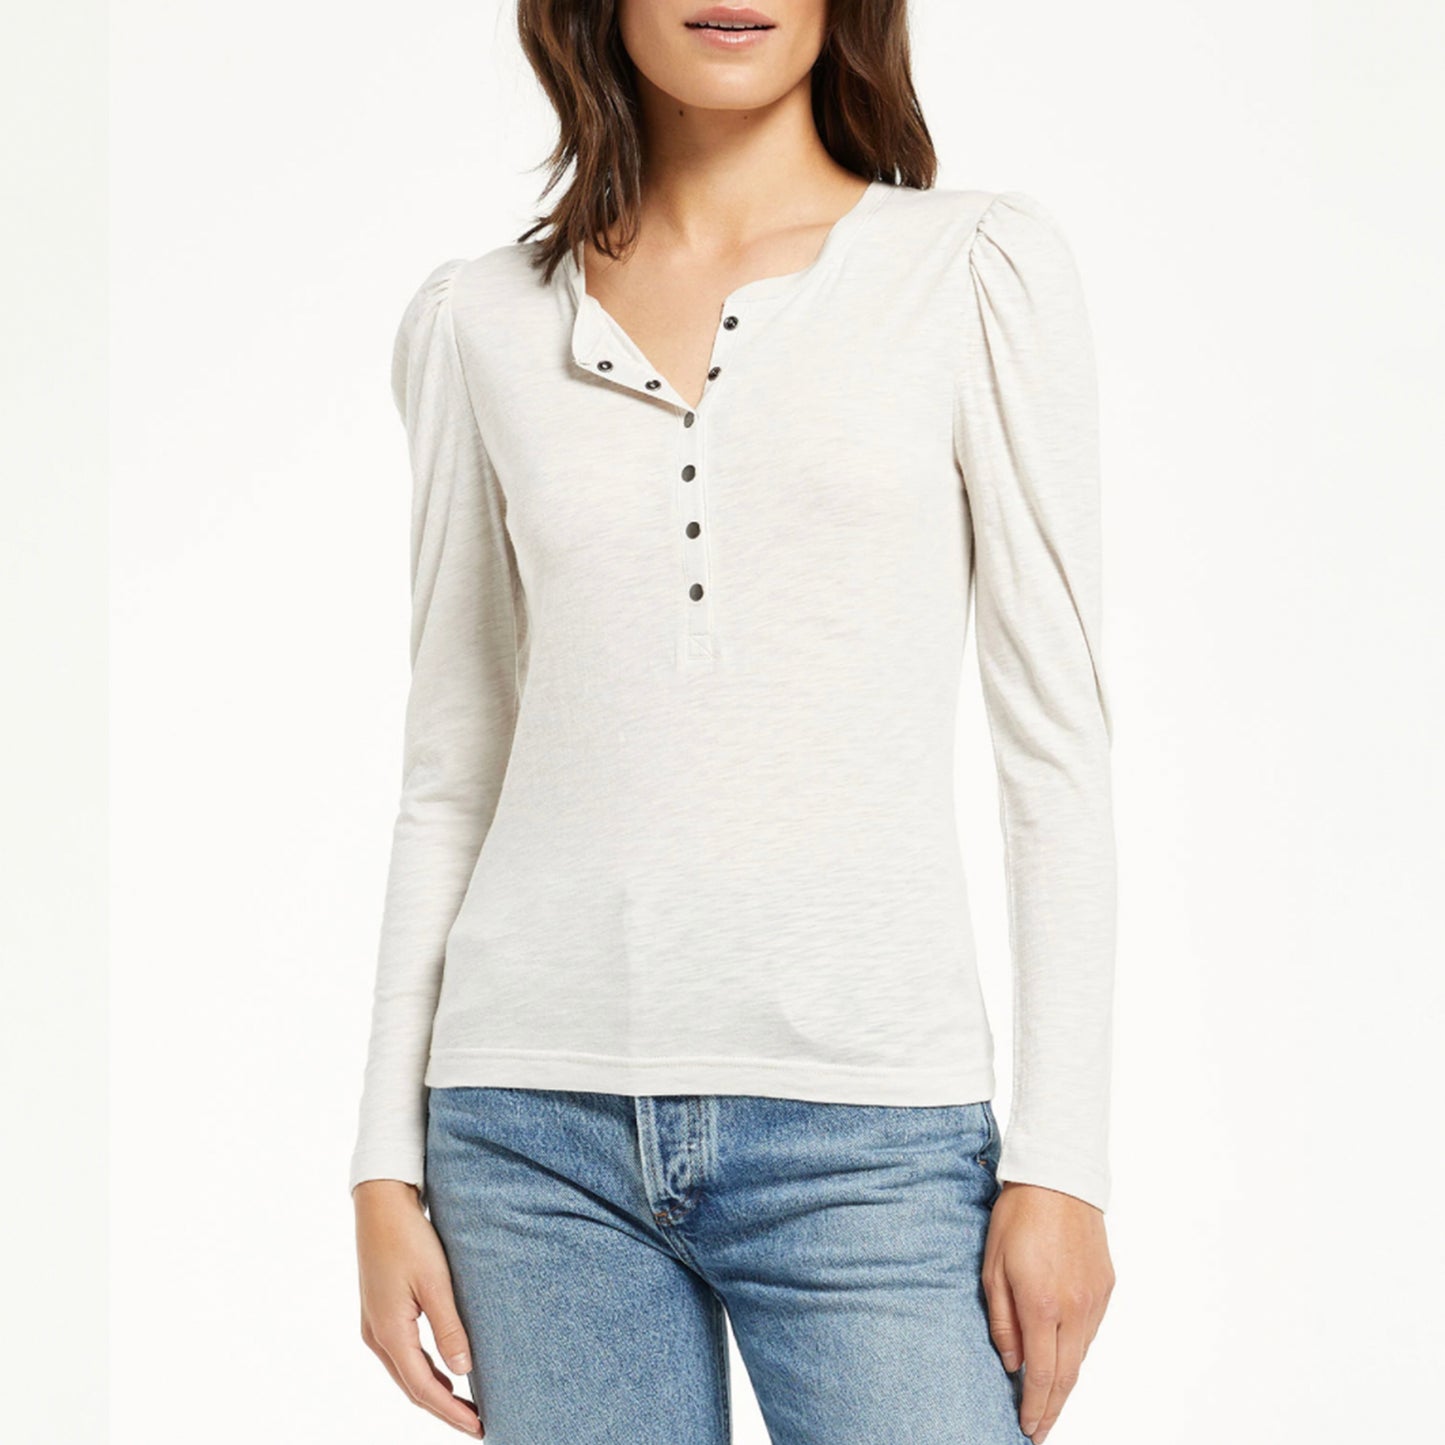 Z Supply Liv Brushed Slub Henley. The Z Supply Liv Brushed Slub Henley Top is an easy choice for so many occasions. This top features a set in puff shoulder, and a rounded neckline with snap closure. You can dress this style up or down, it's so versatile!